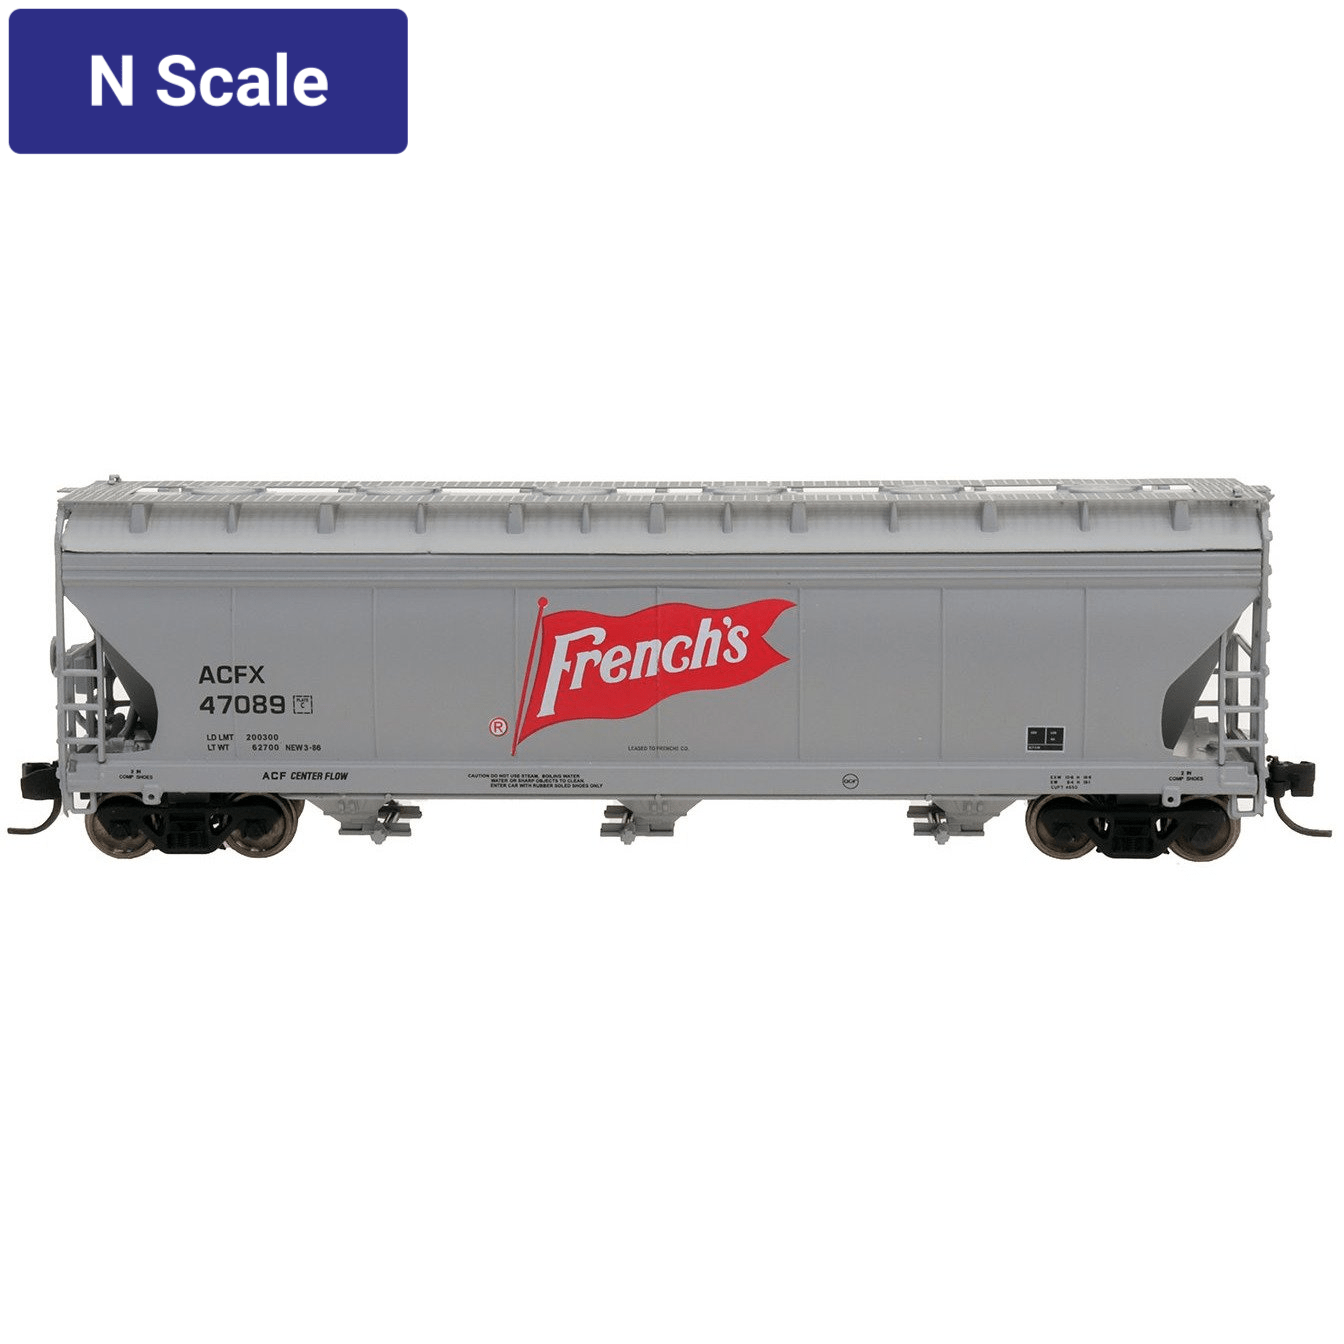 Intermountain, 67085, N Scale, 3-Bay Covered Hopper, French's